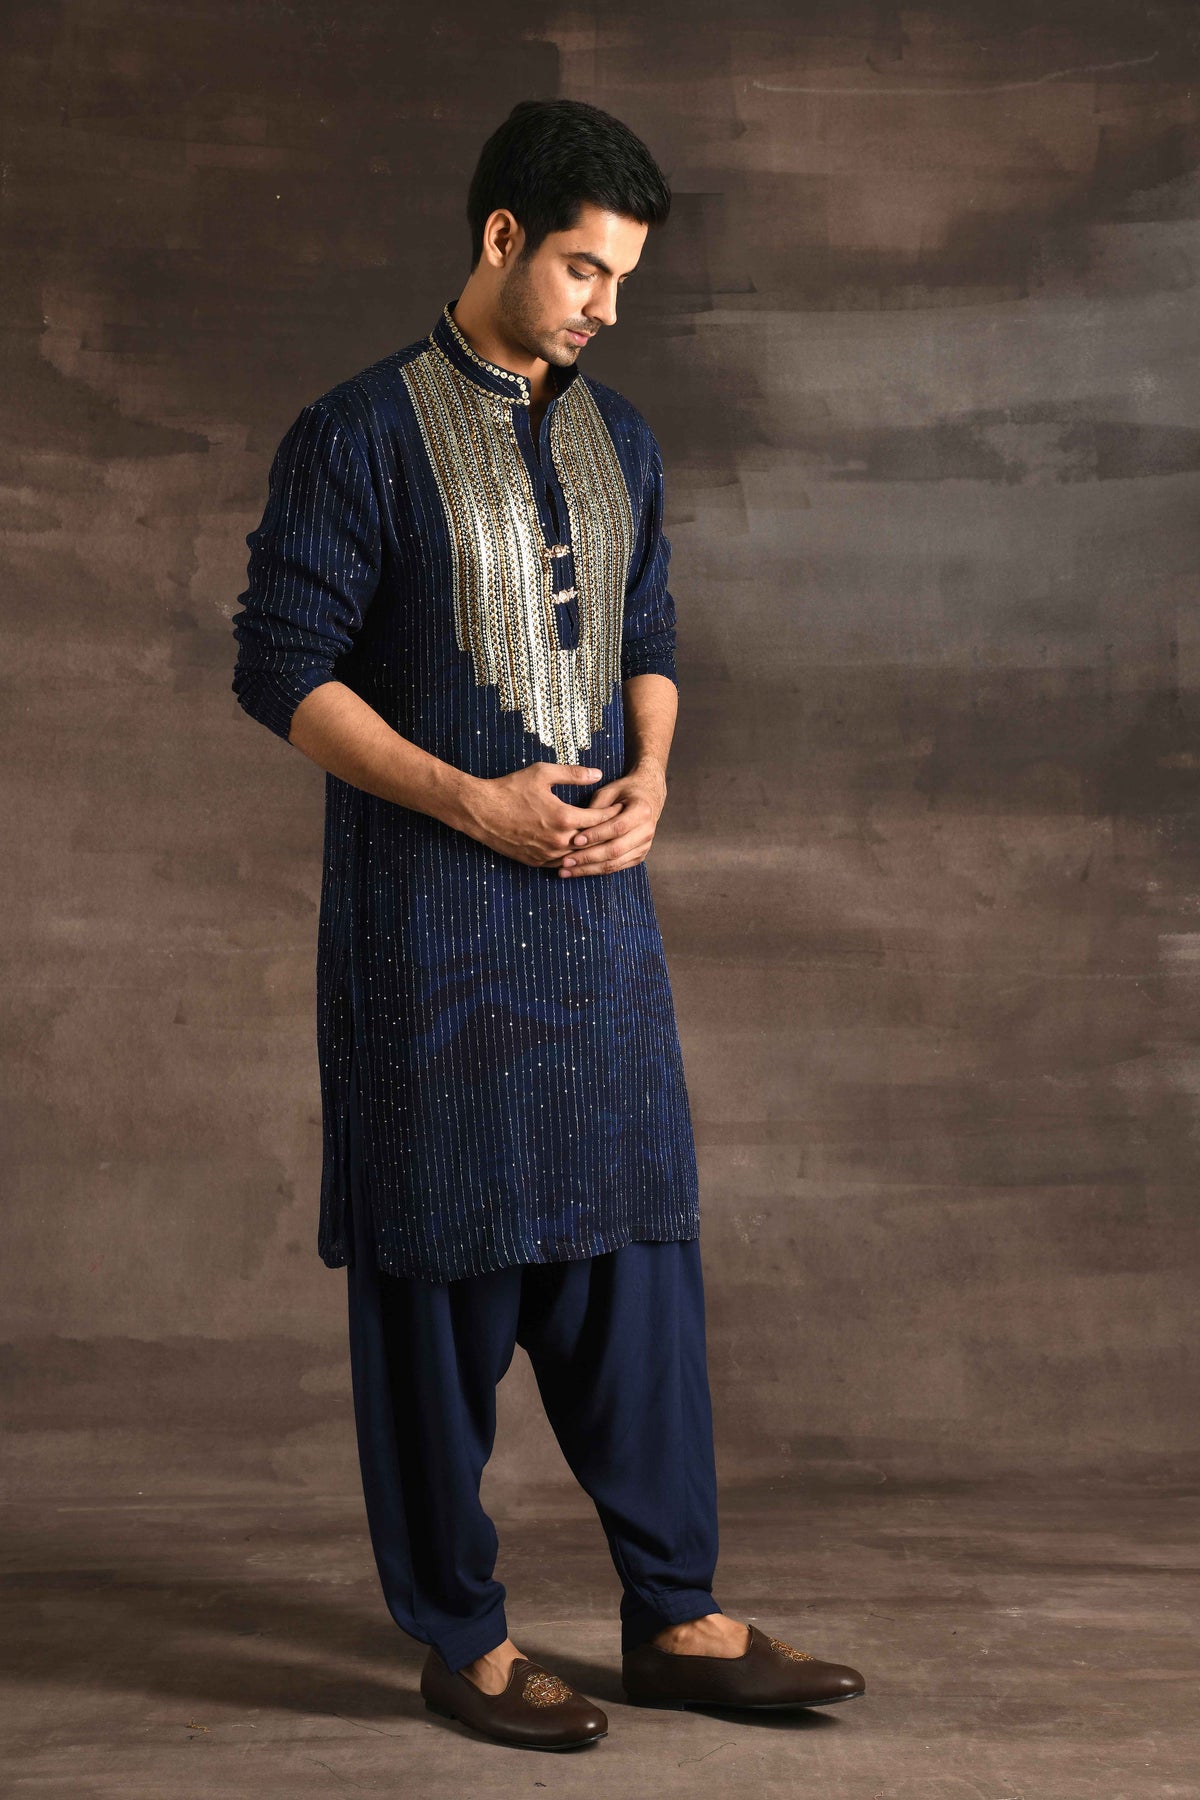 A Navy Blue Coloured Kurta With Gold Coin Work